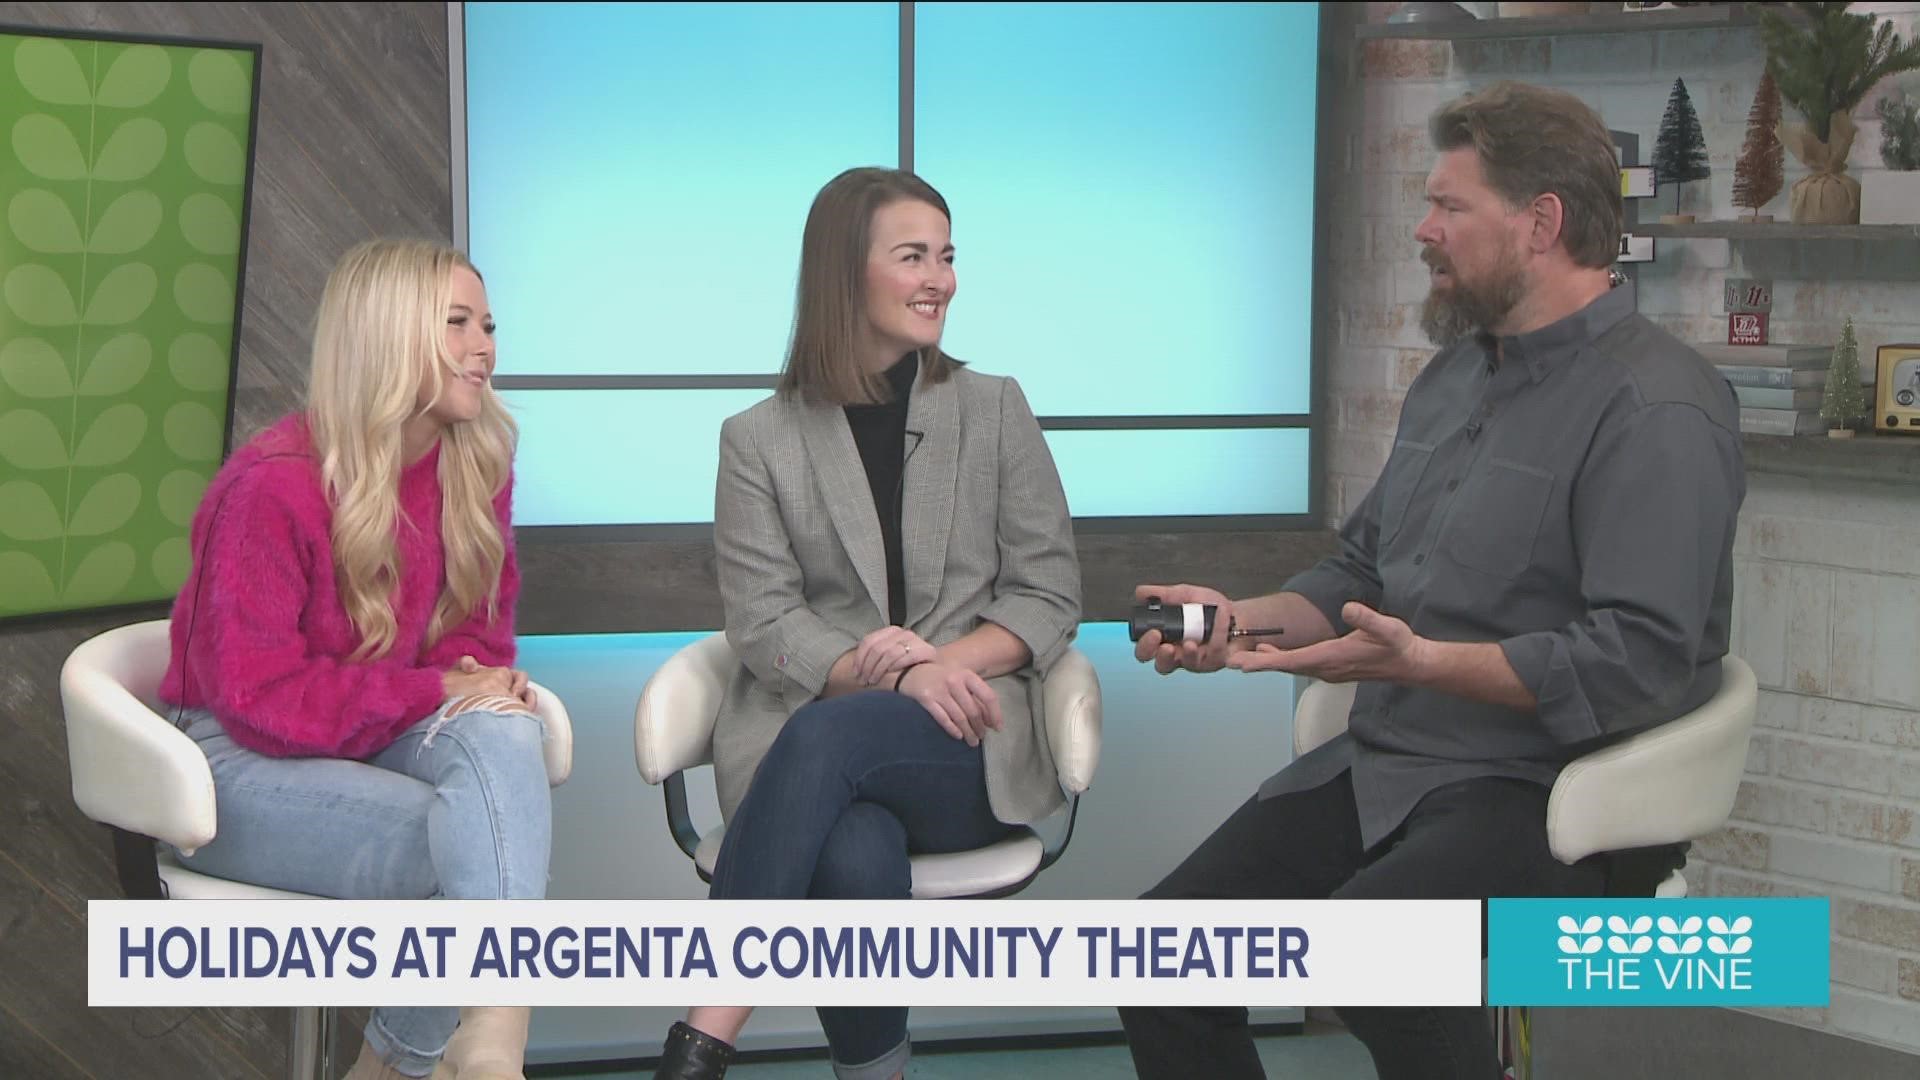 Learn more about upcoming shows and their education program at argentacommunitytheater.org